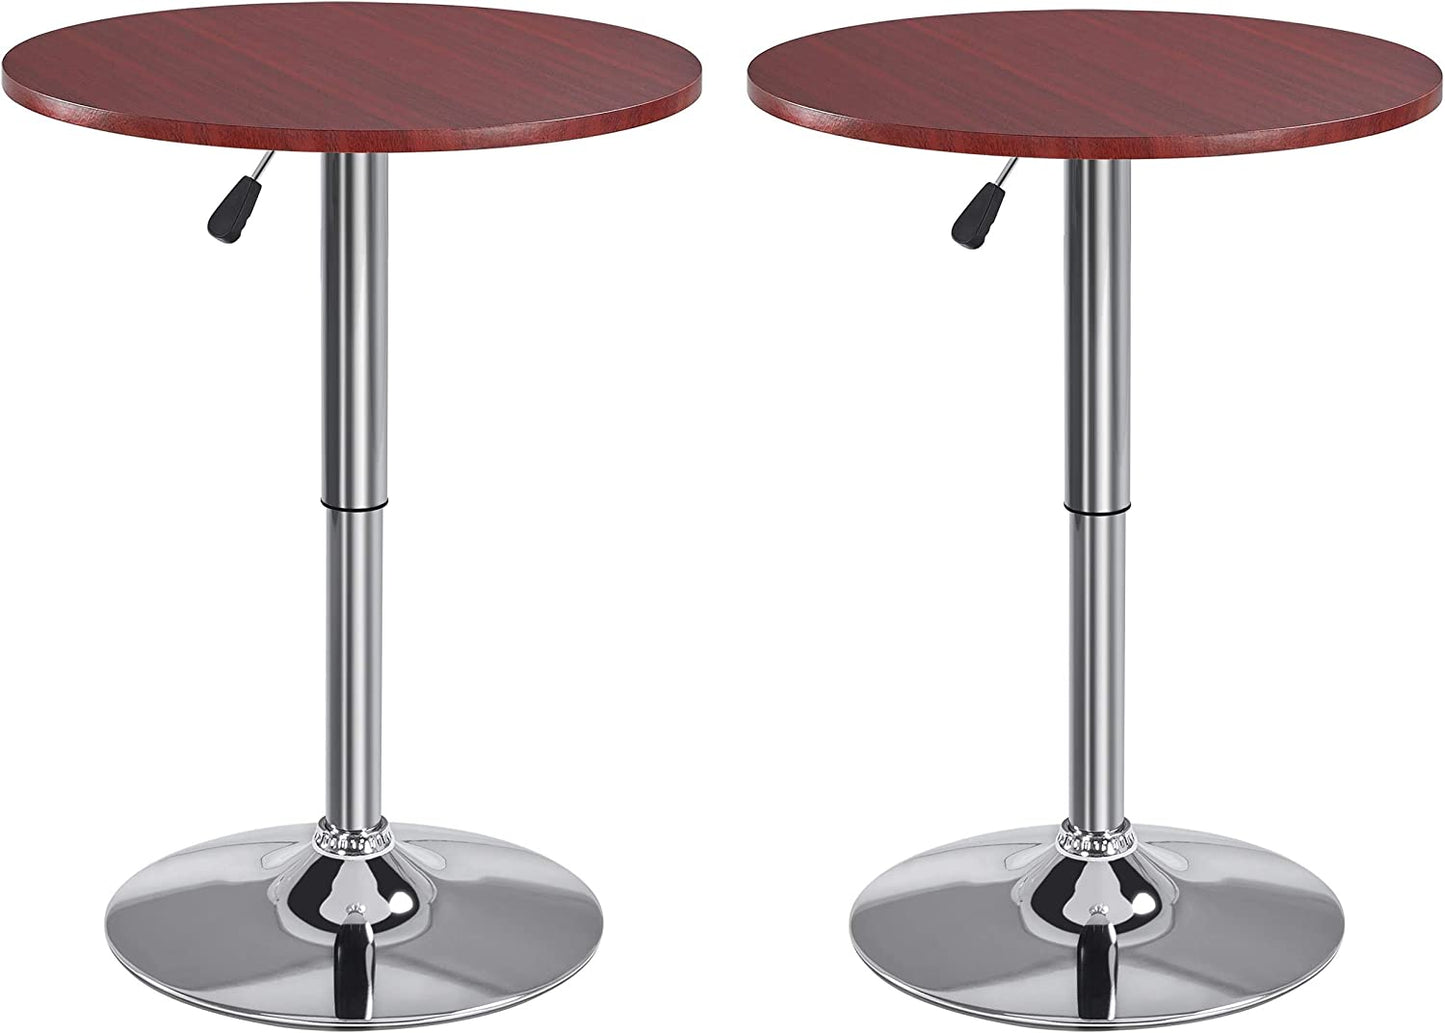 round Pub Bar Table High Top Table Cocktail Table MDF Top with Silver Leg Base 27.4-35.8 Inch Adjustable 88 Lb Capacity, Mahogany Color